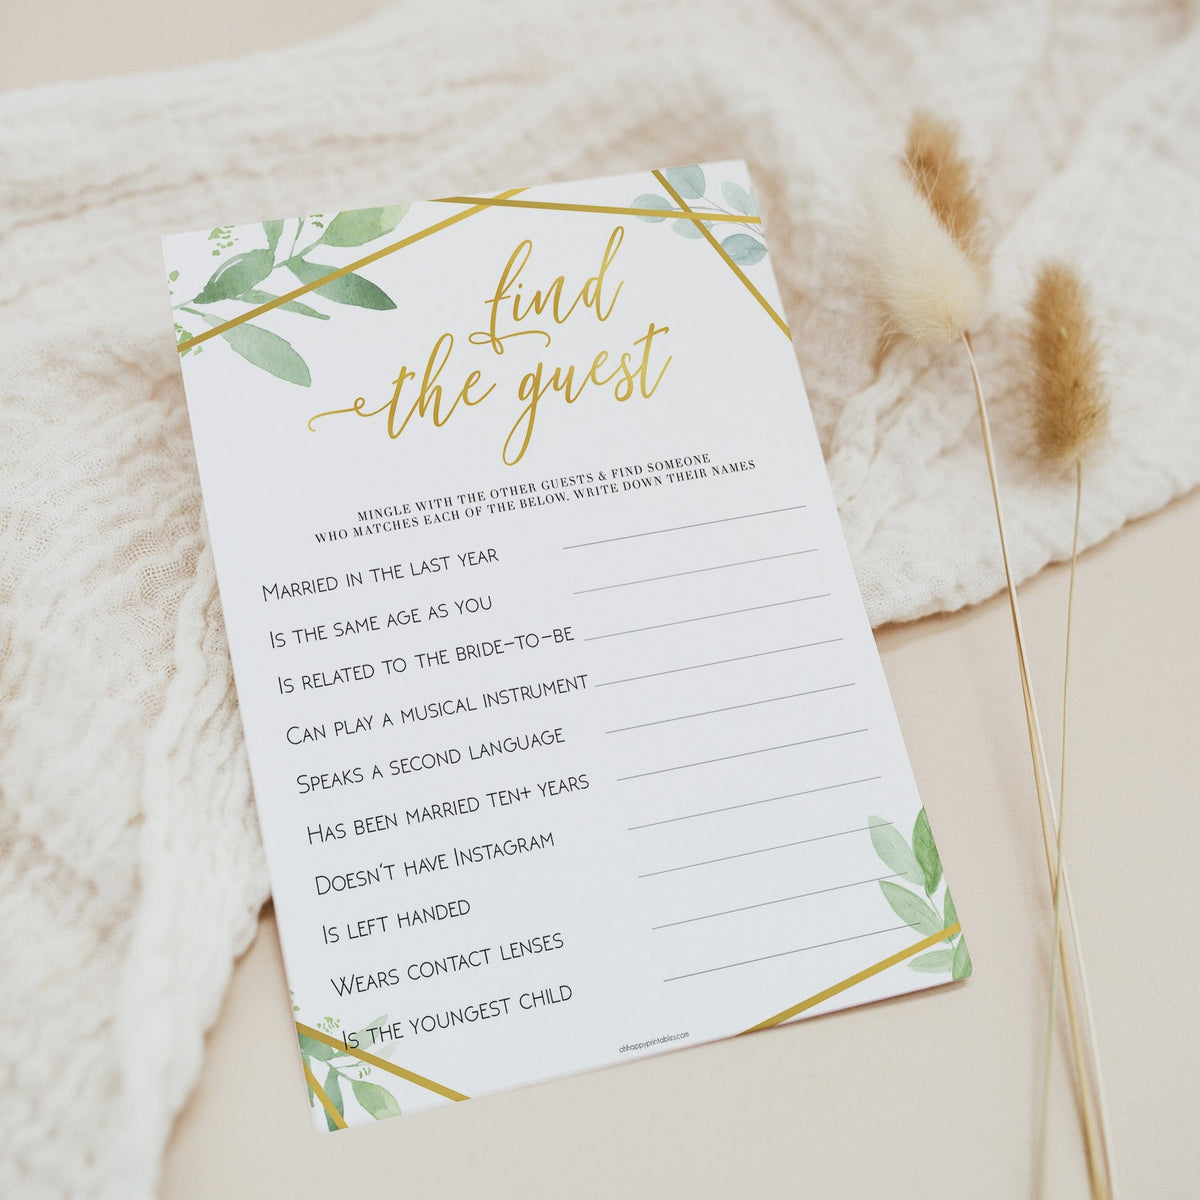 Find The Guest Bridal Game - Gold Greenery